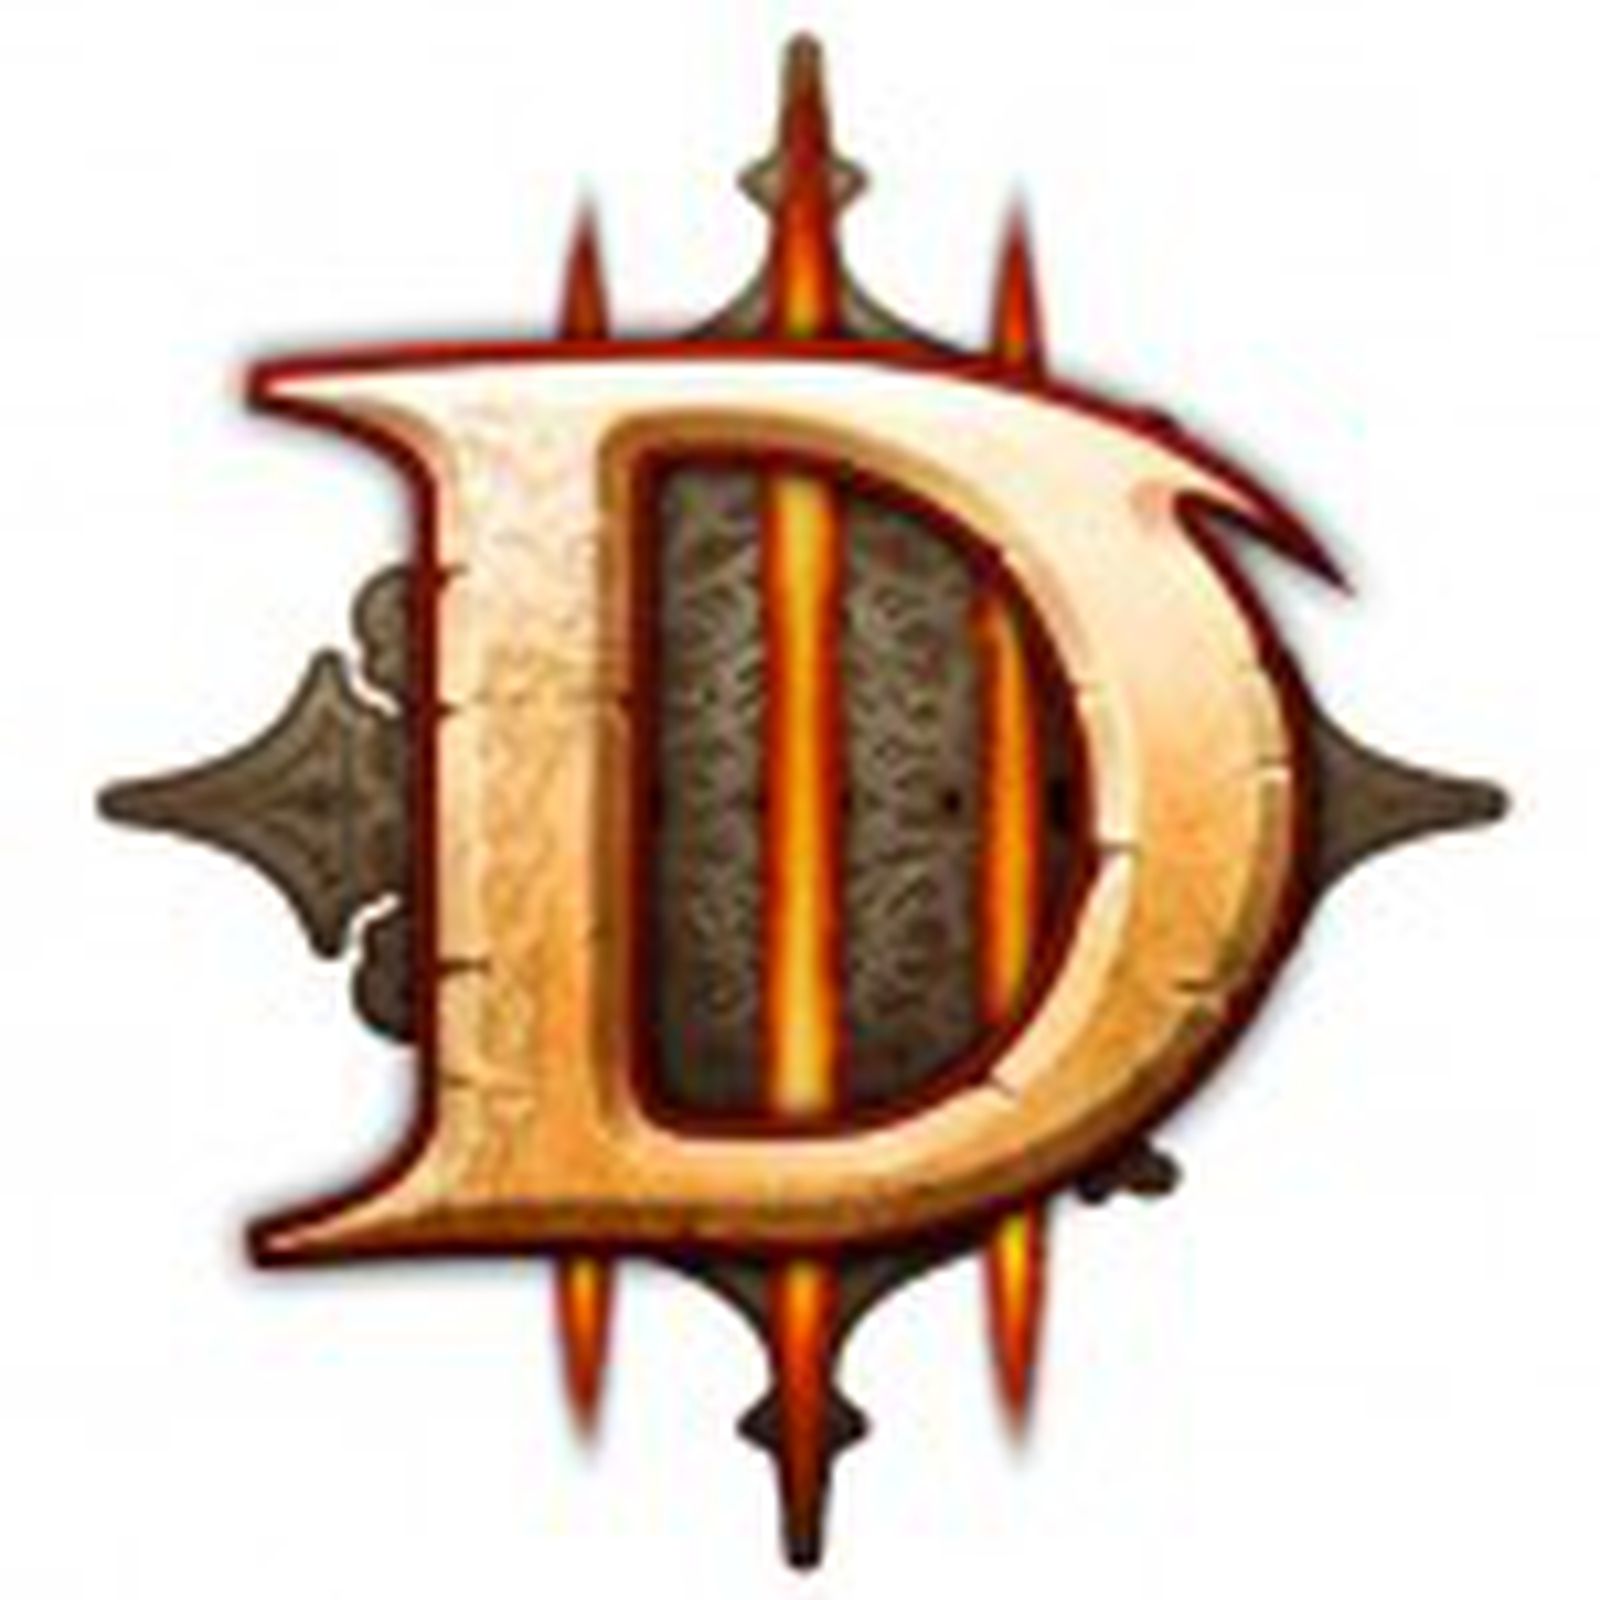 download the new version for ios Diablo 4